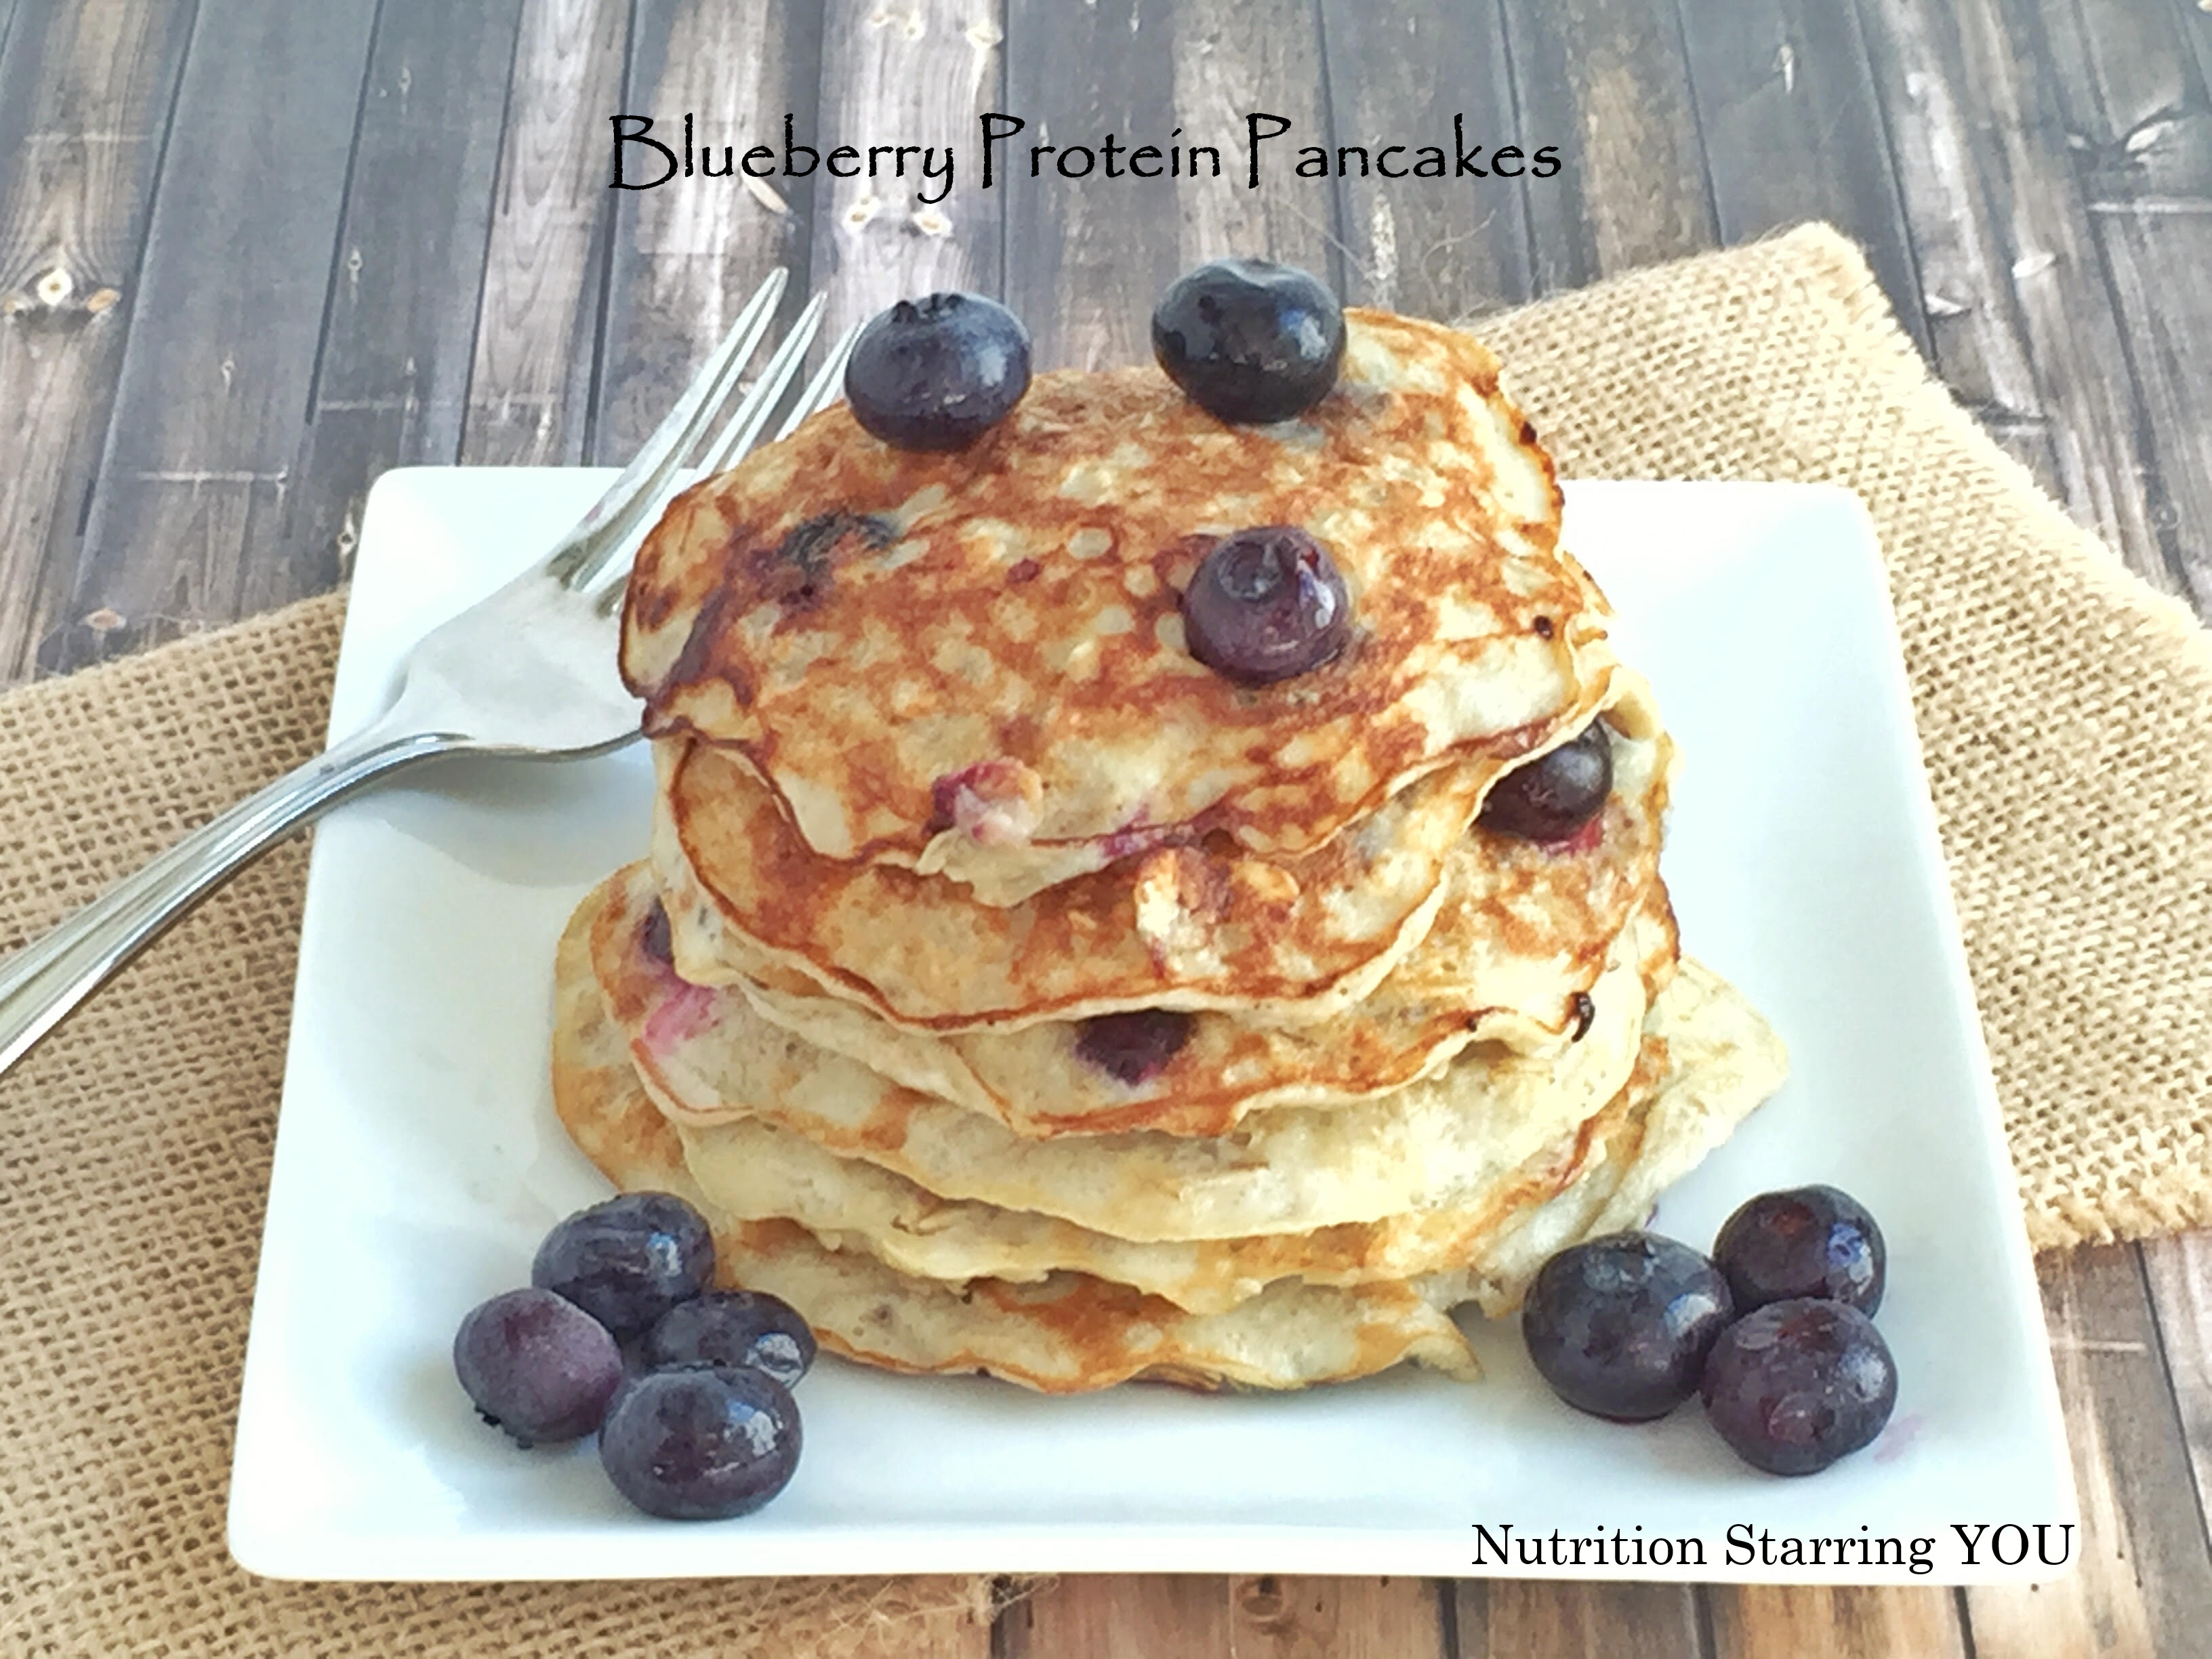 Blueberry Protein Pancakes with text